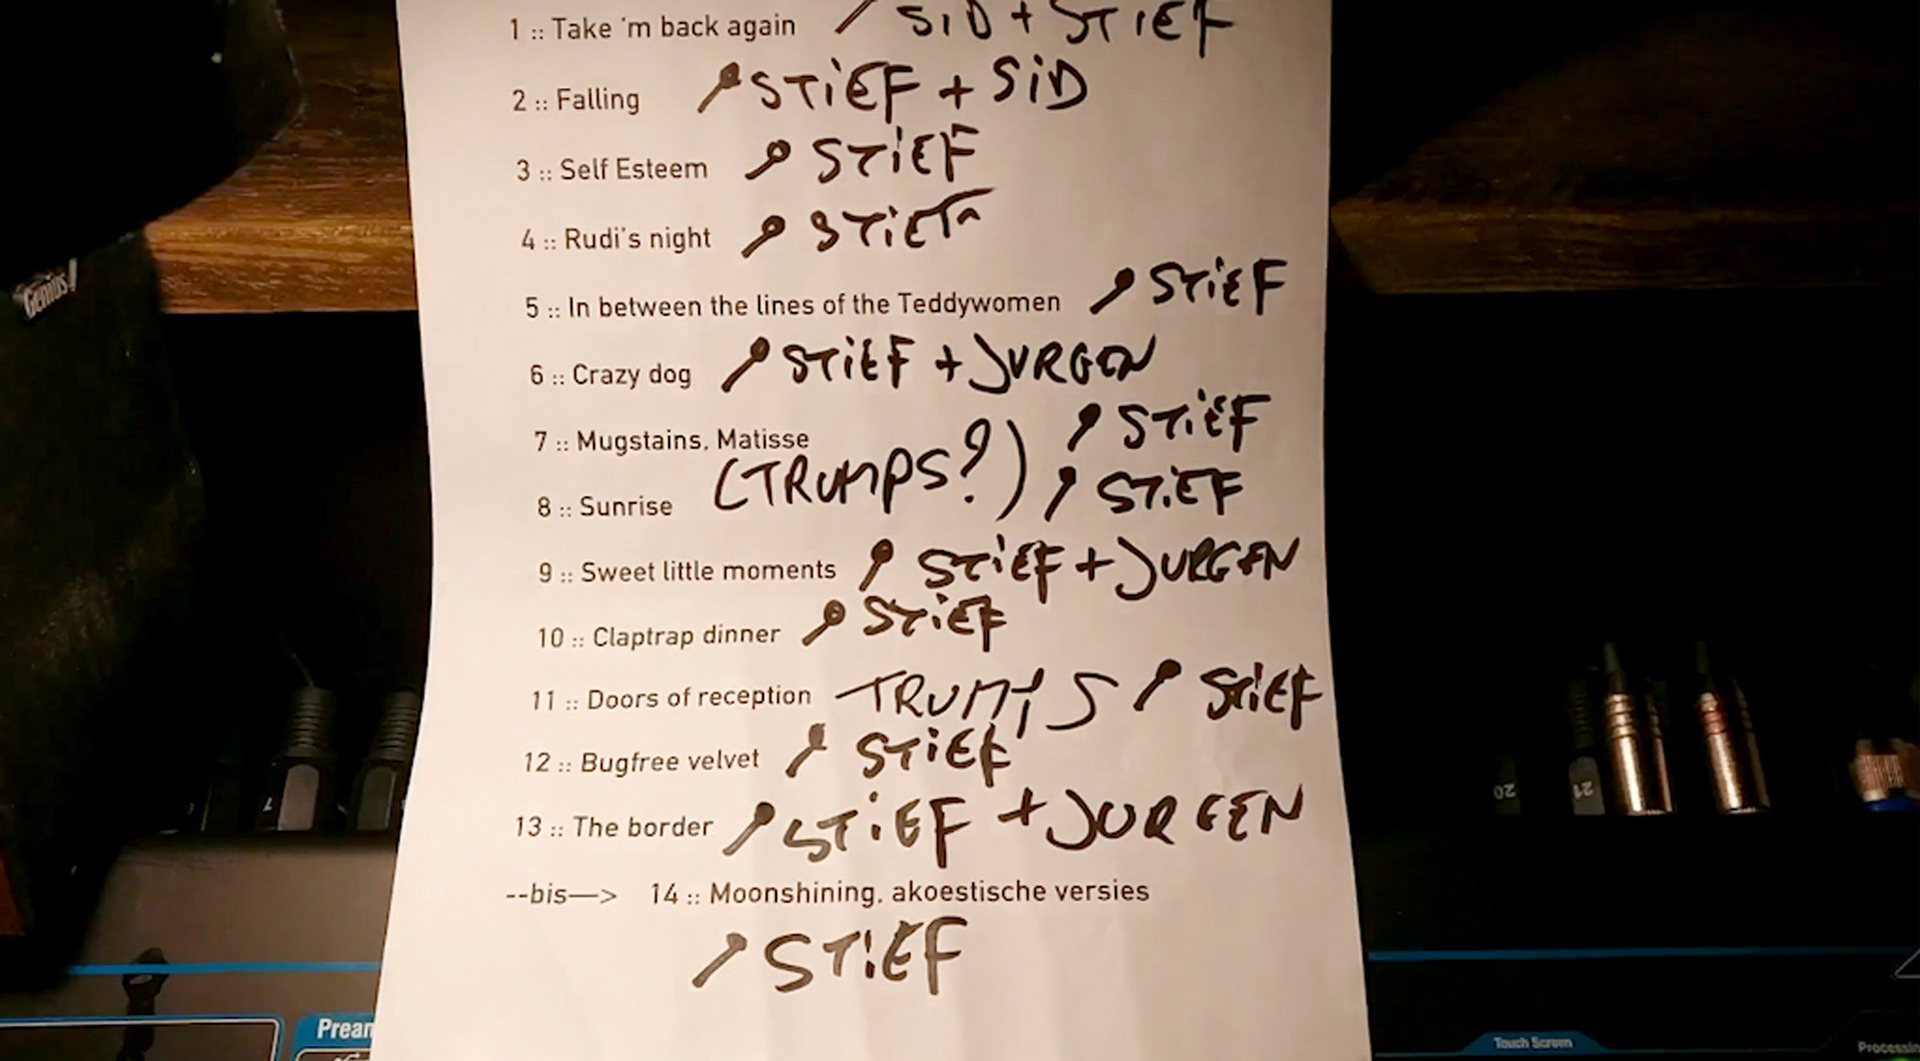 setlist of the concert in Budapest